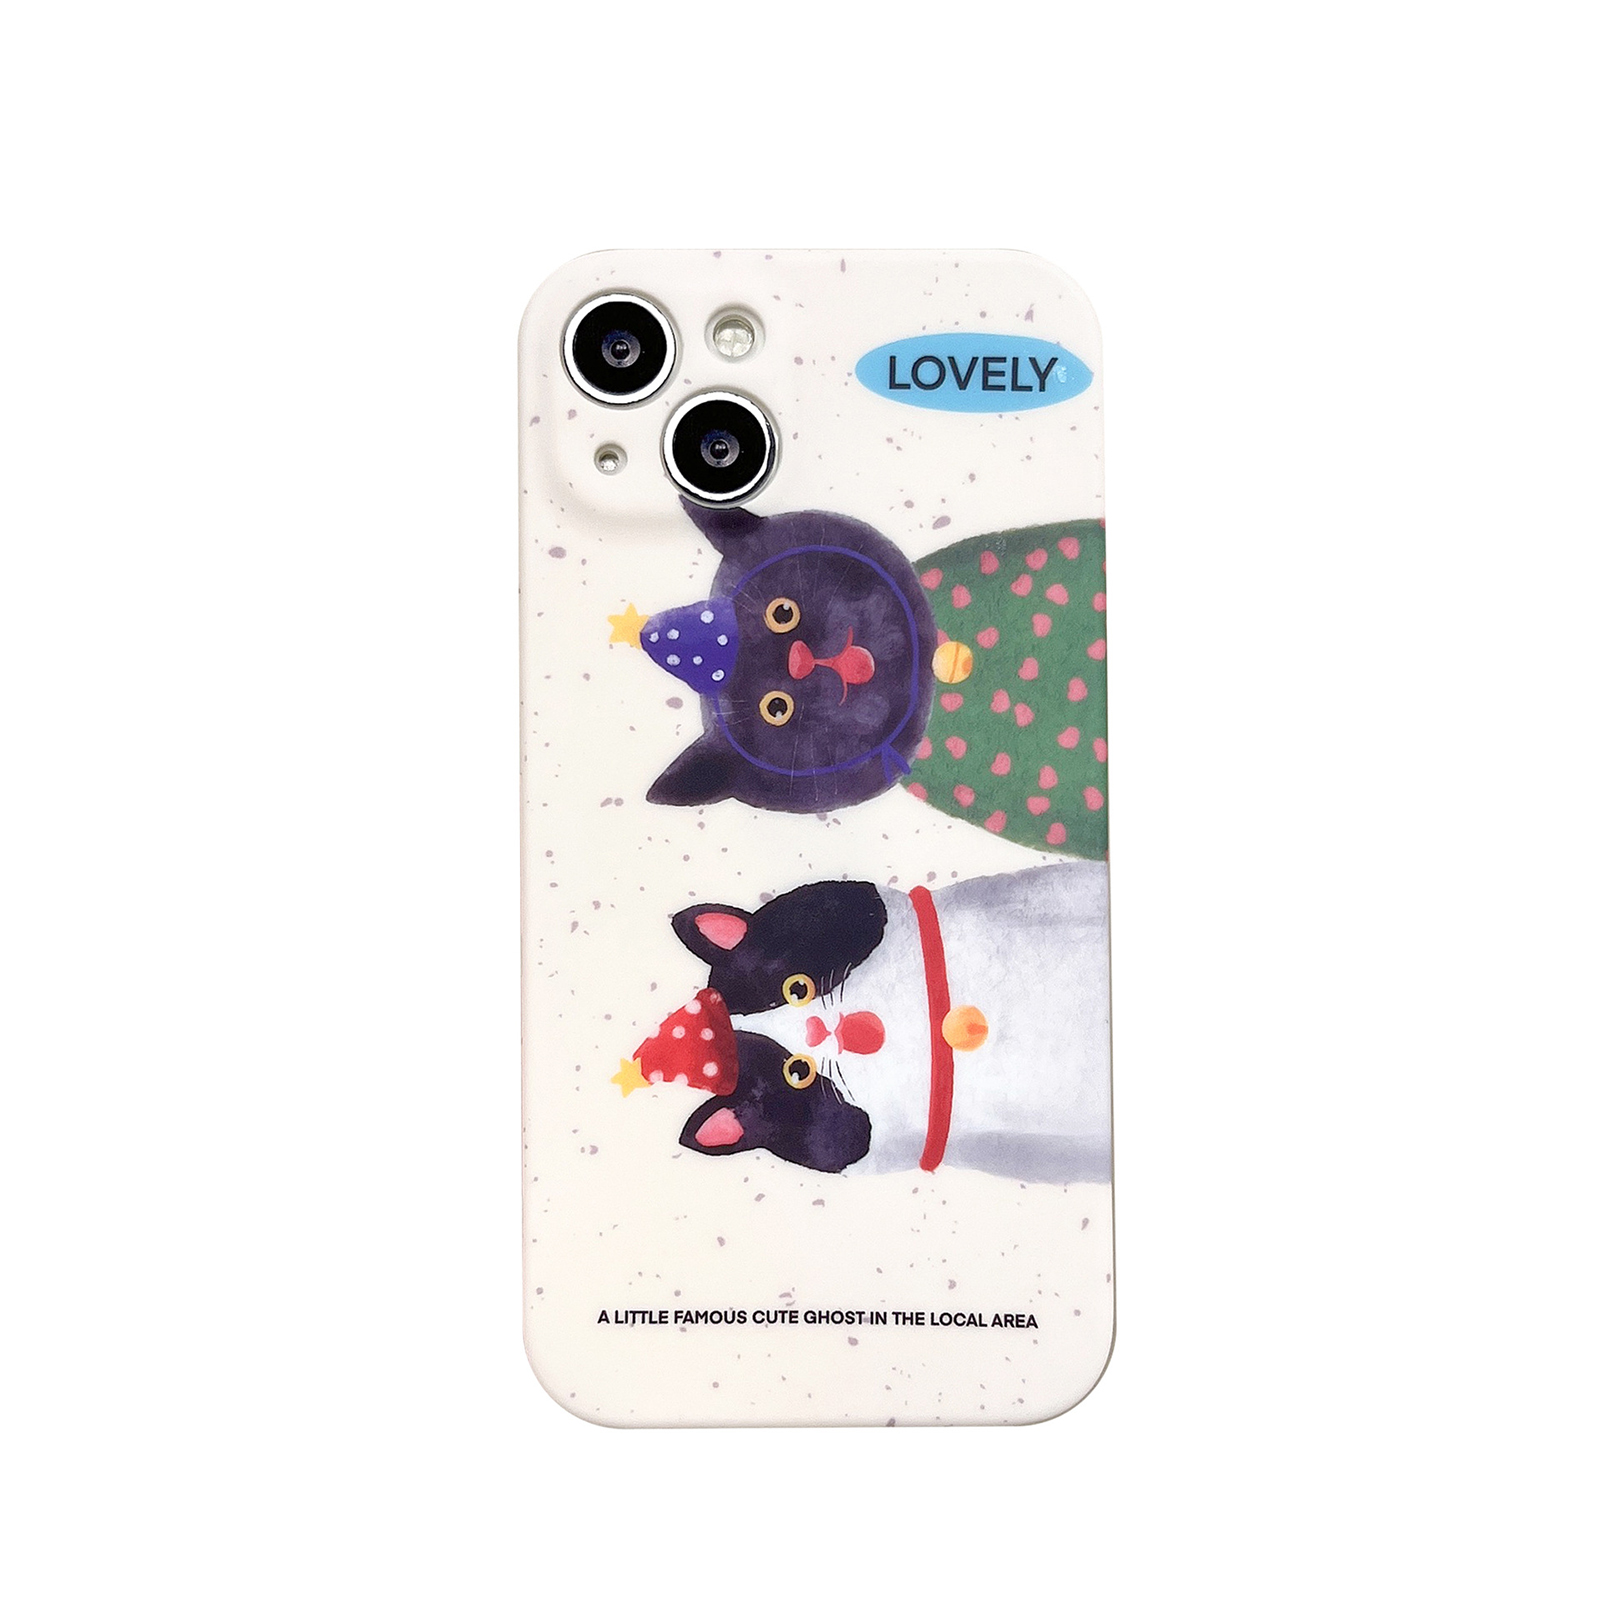 Phone Protection Case Cartoon Funny Cat Shockproof Cover Mobile Phone Protective Skin Precise Hole Position Compatible For IPhone 2 Cats in Christmas Hats 15promax